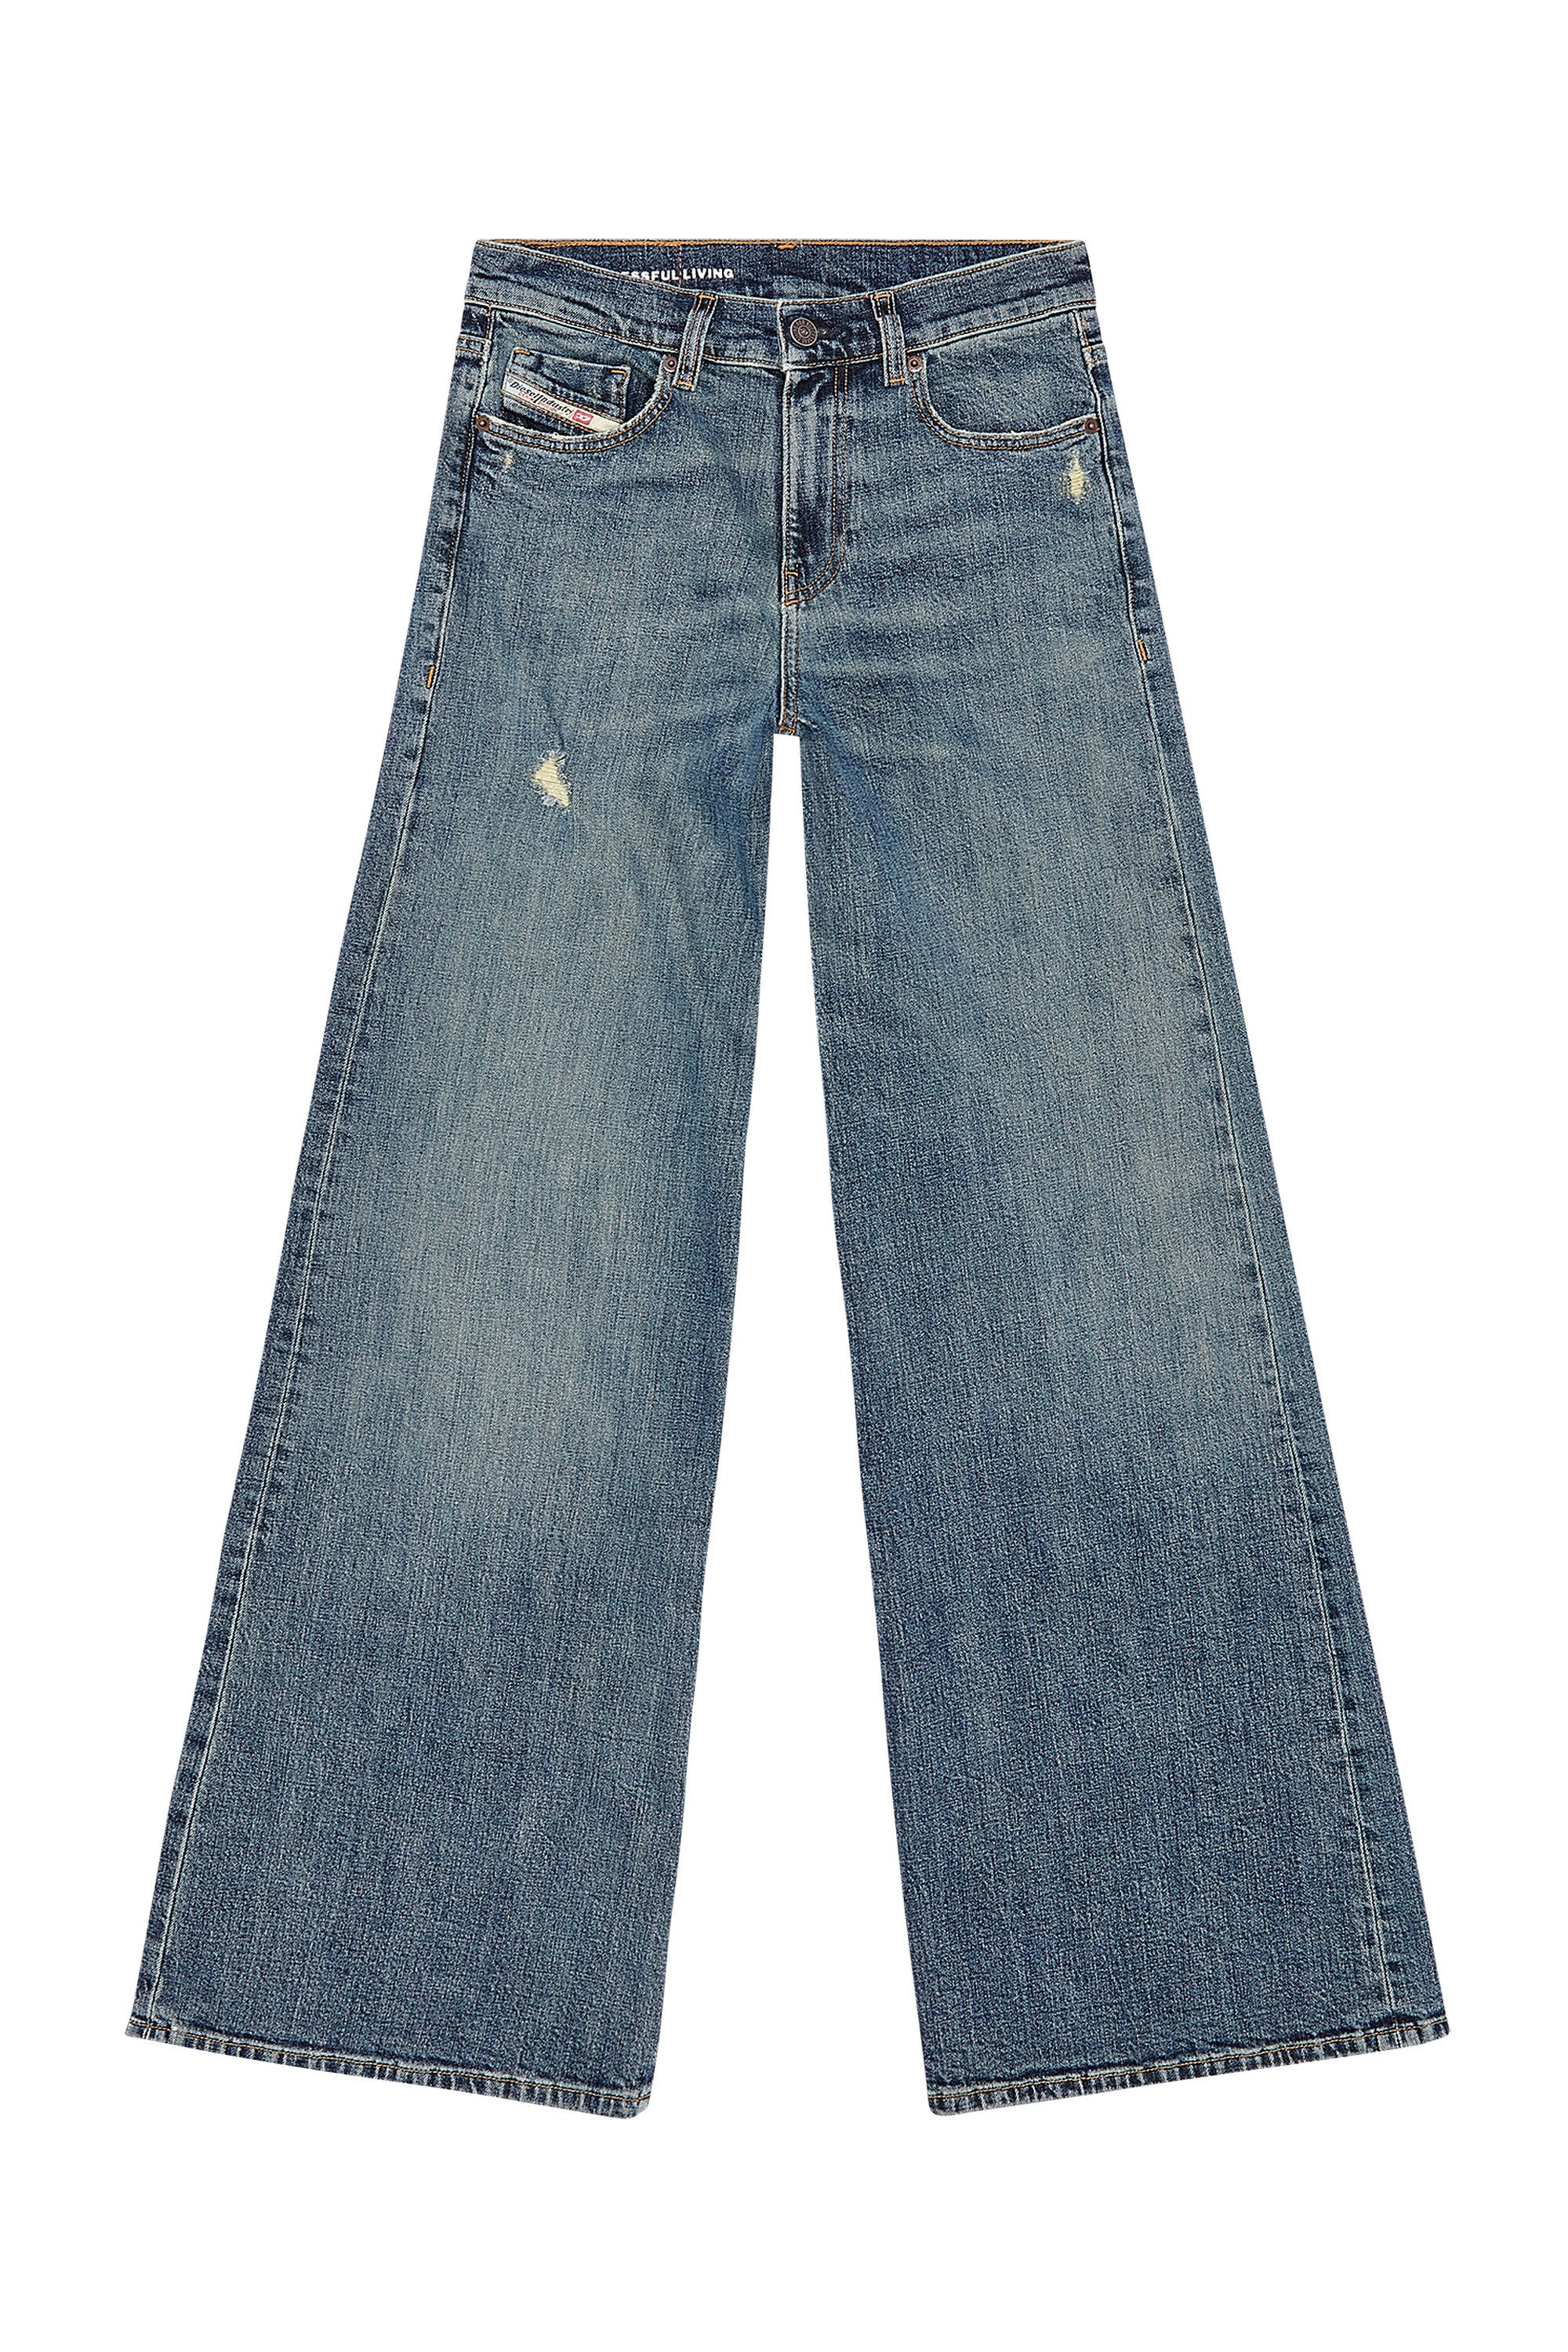 BOOTCUT AND FLARE JEANS 1978 D-AKEMI 0DQAC - 1